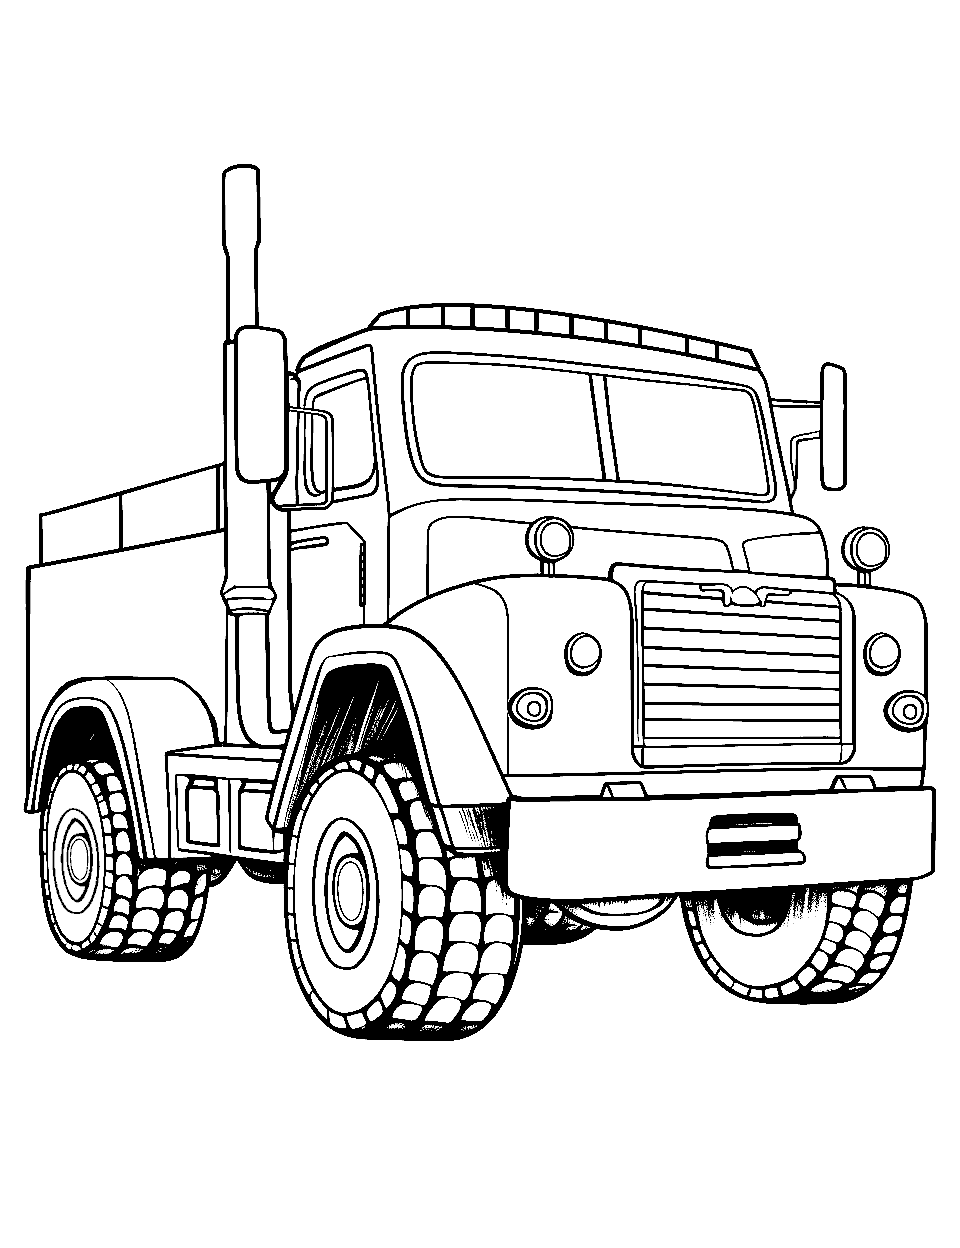 Monster Truck Fire Engine Coloring Page - A fire truck with huge monster truck wheels.